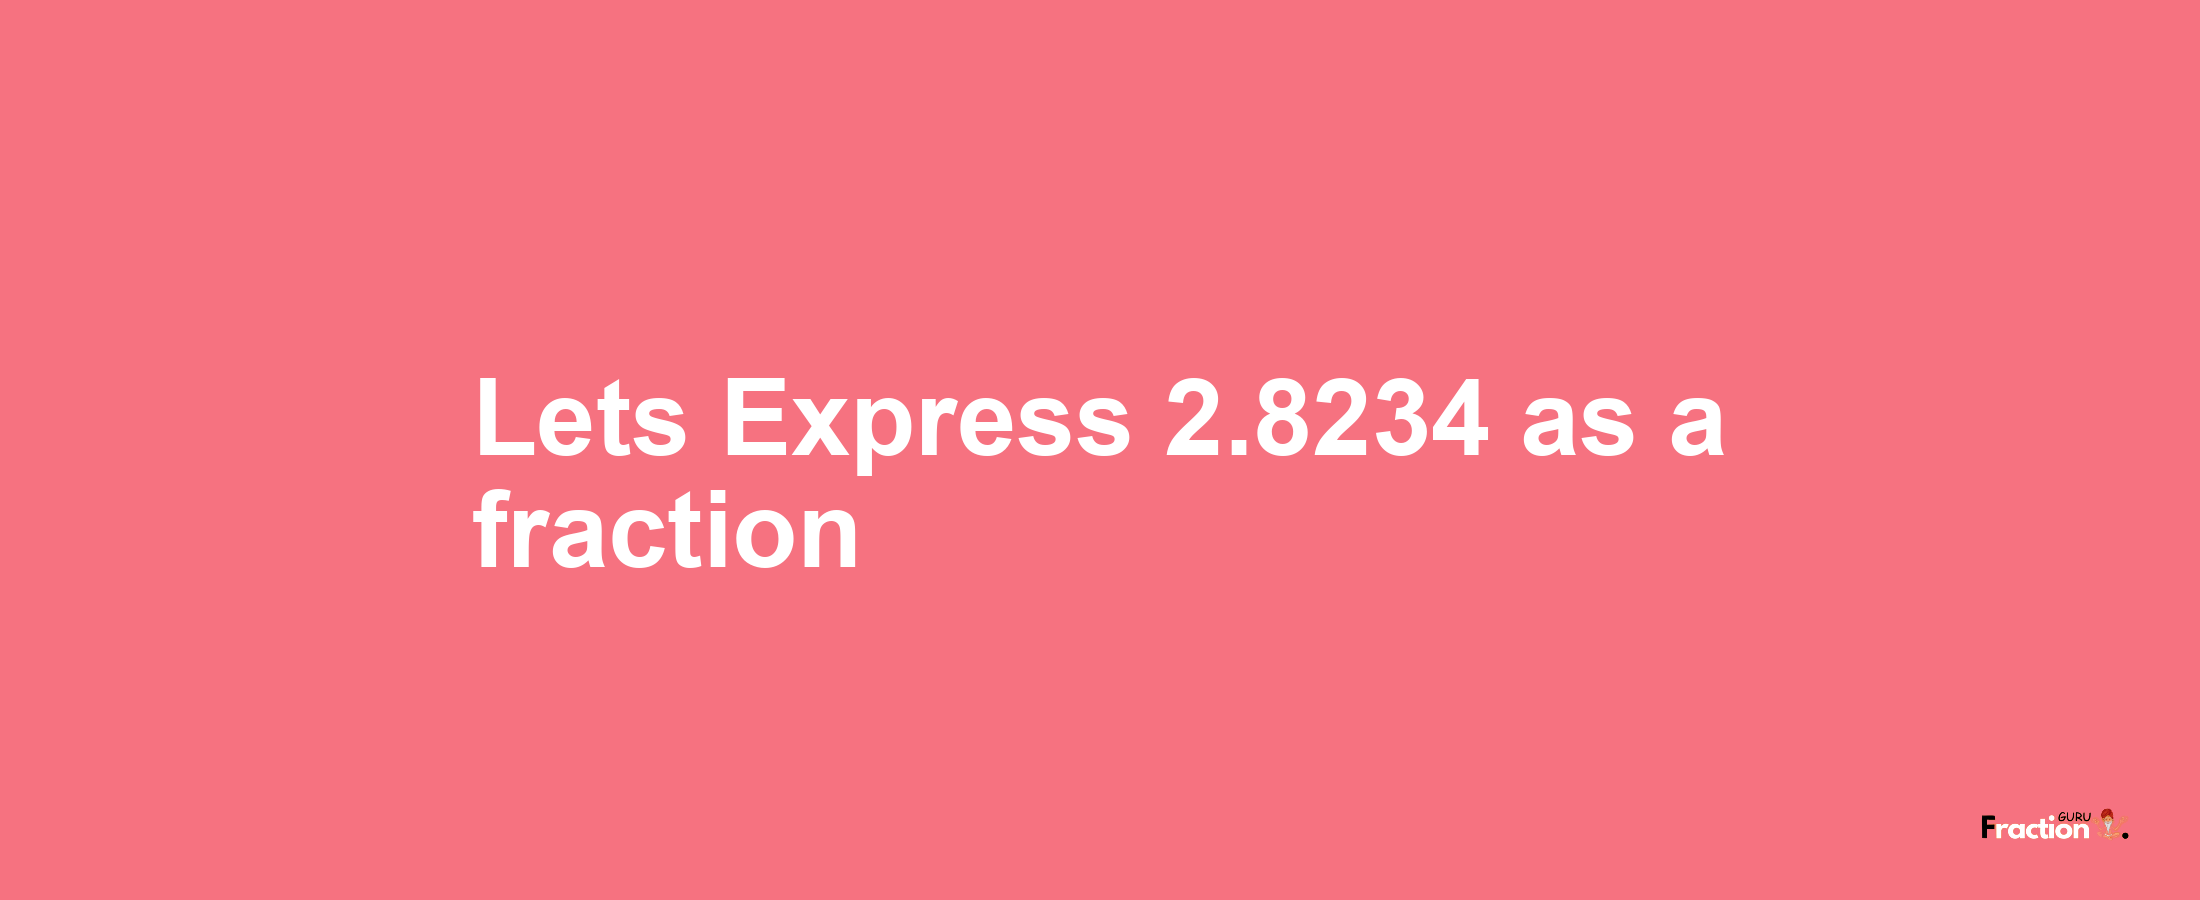 Lets Express 2.8234 as afraction